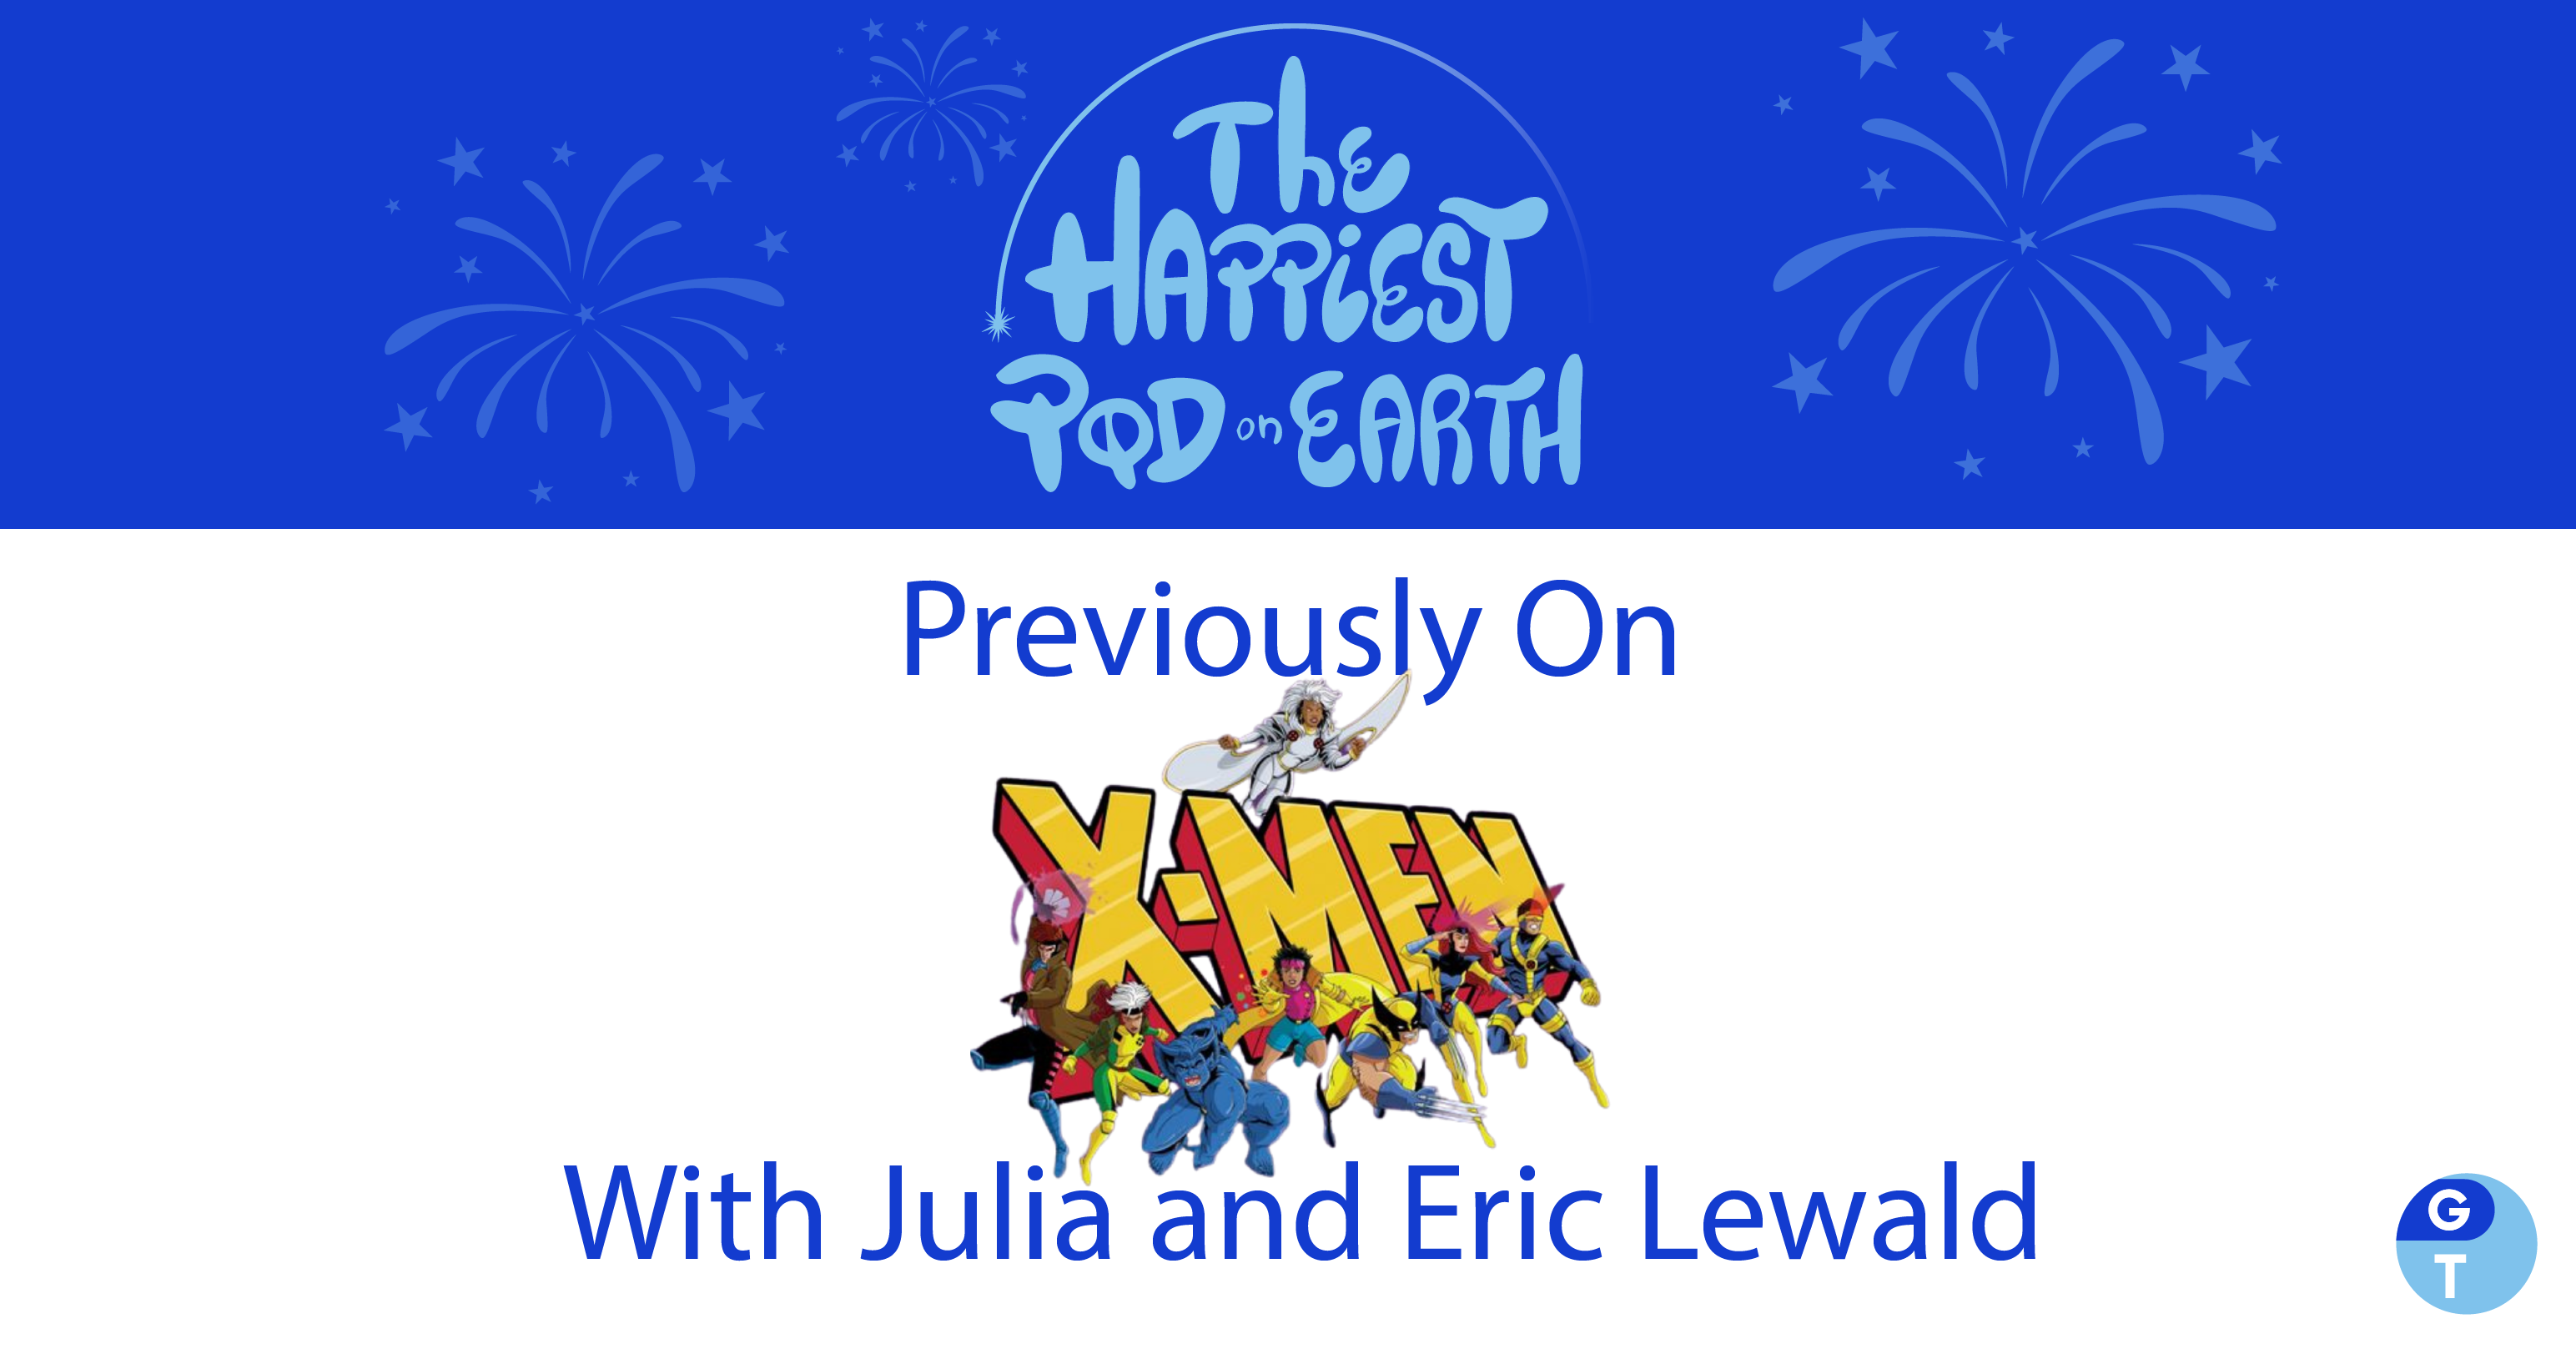 Podcast logo with fireworks and podcast episode name “Previously on X-Men with Julia and Eric Lewald” with these X-Men characters surrounding the word: Storm, Gambit, Rouge, Jubilee, Wolverine, Jean Grey (aka Marvel Girl), and Cyclops